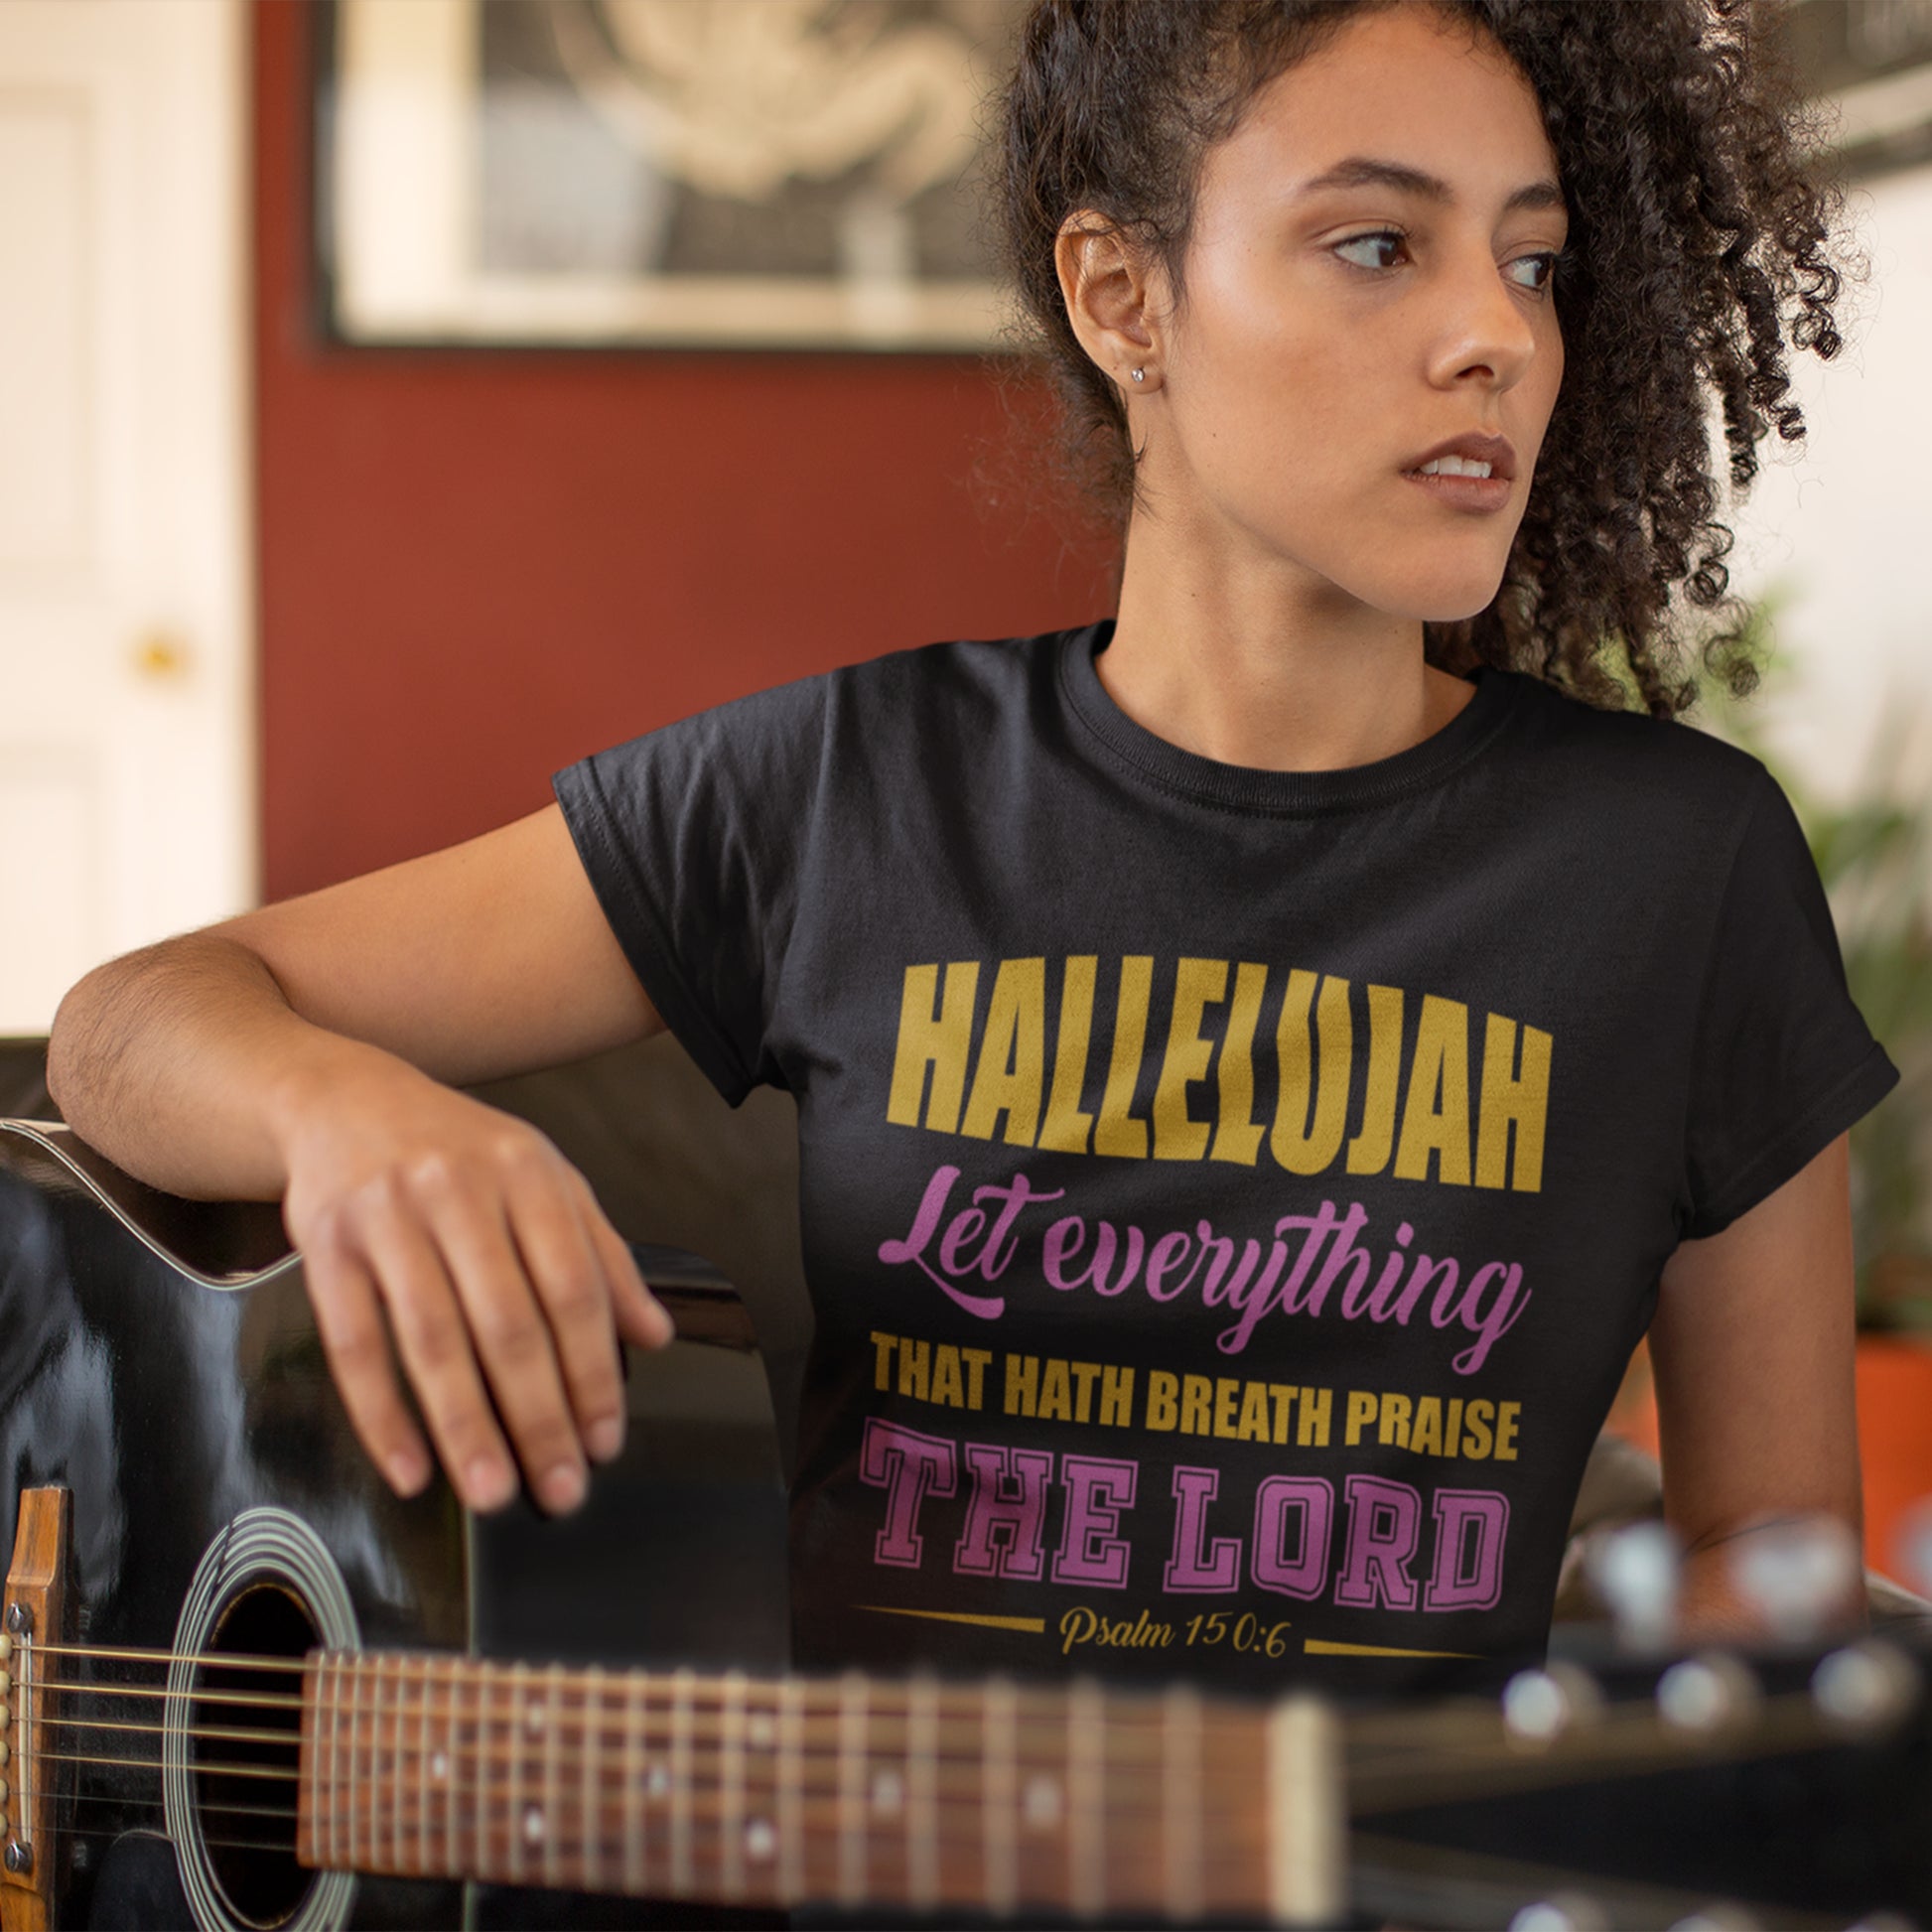 Hallelujah Christian Tee - Gold - Christian - t shirt - Anointed T Shirts